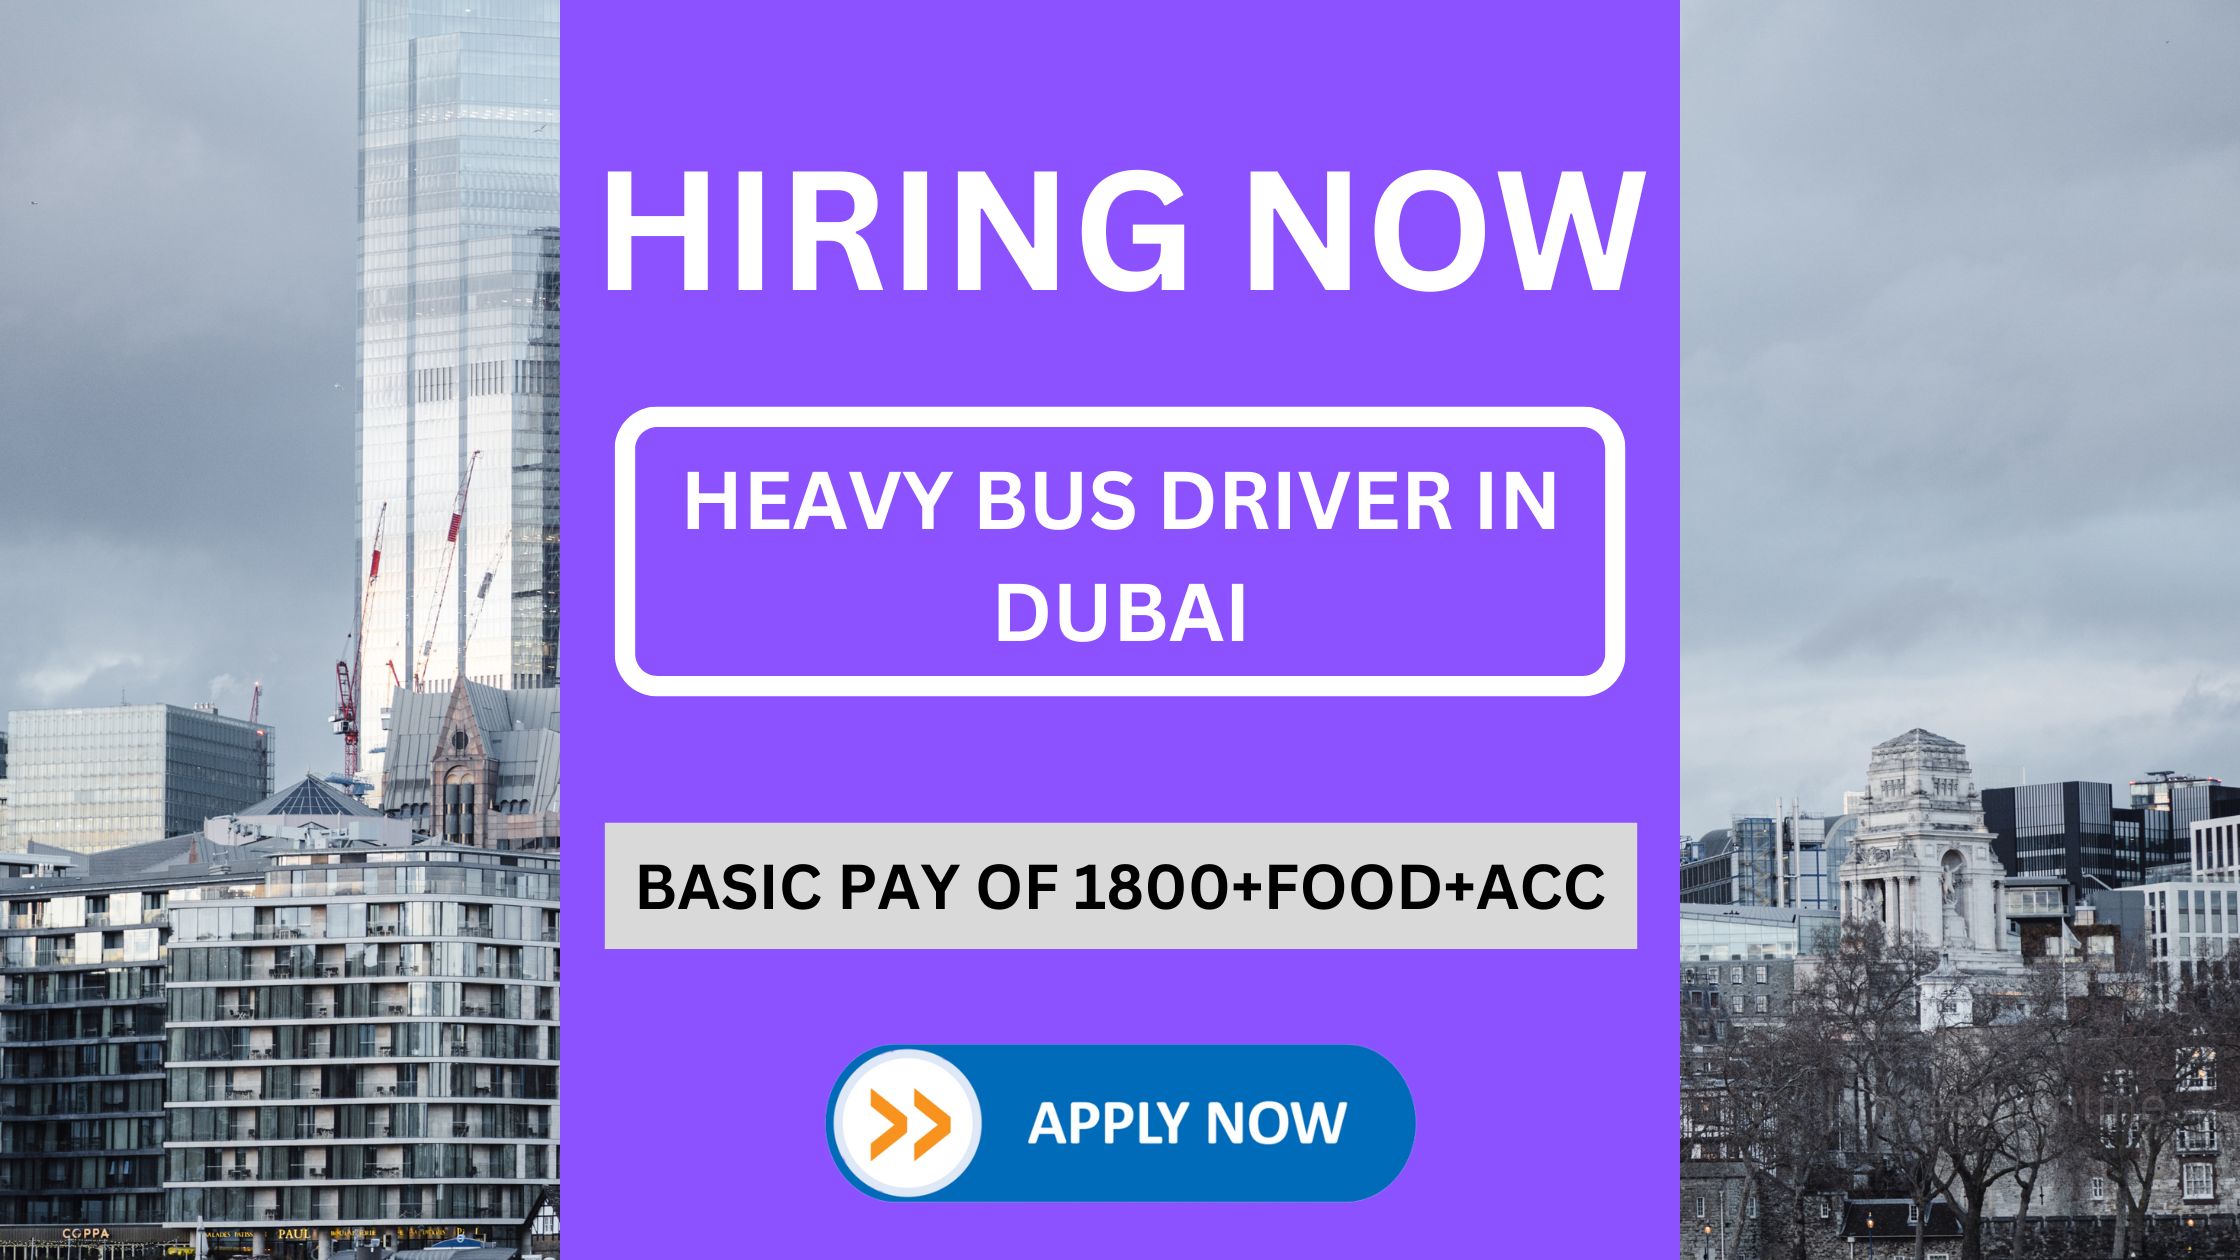 Heavy Bus Driver in Dubai - Basic Salary: 1800 AED Food and Accommodation